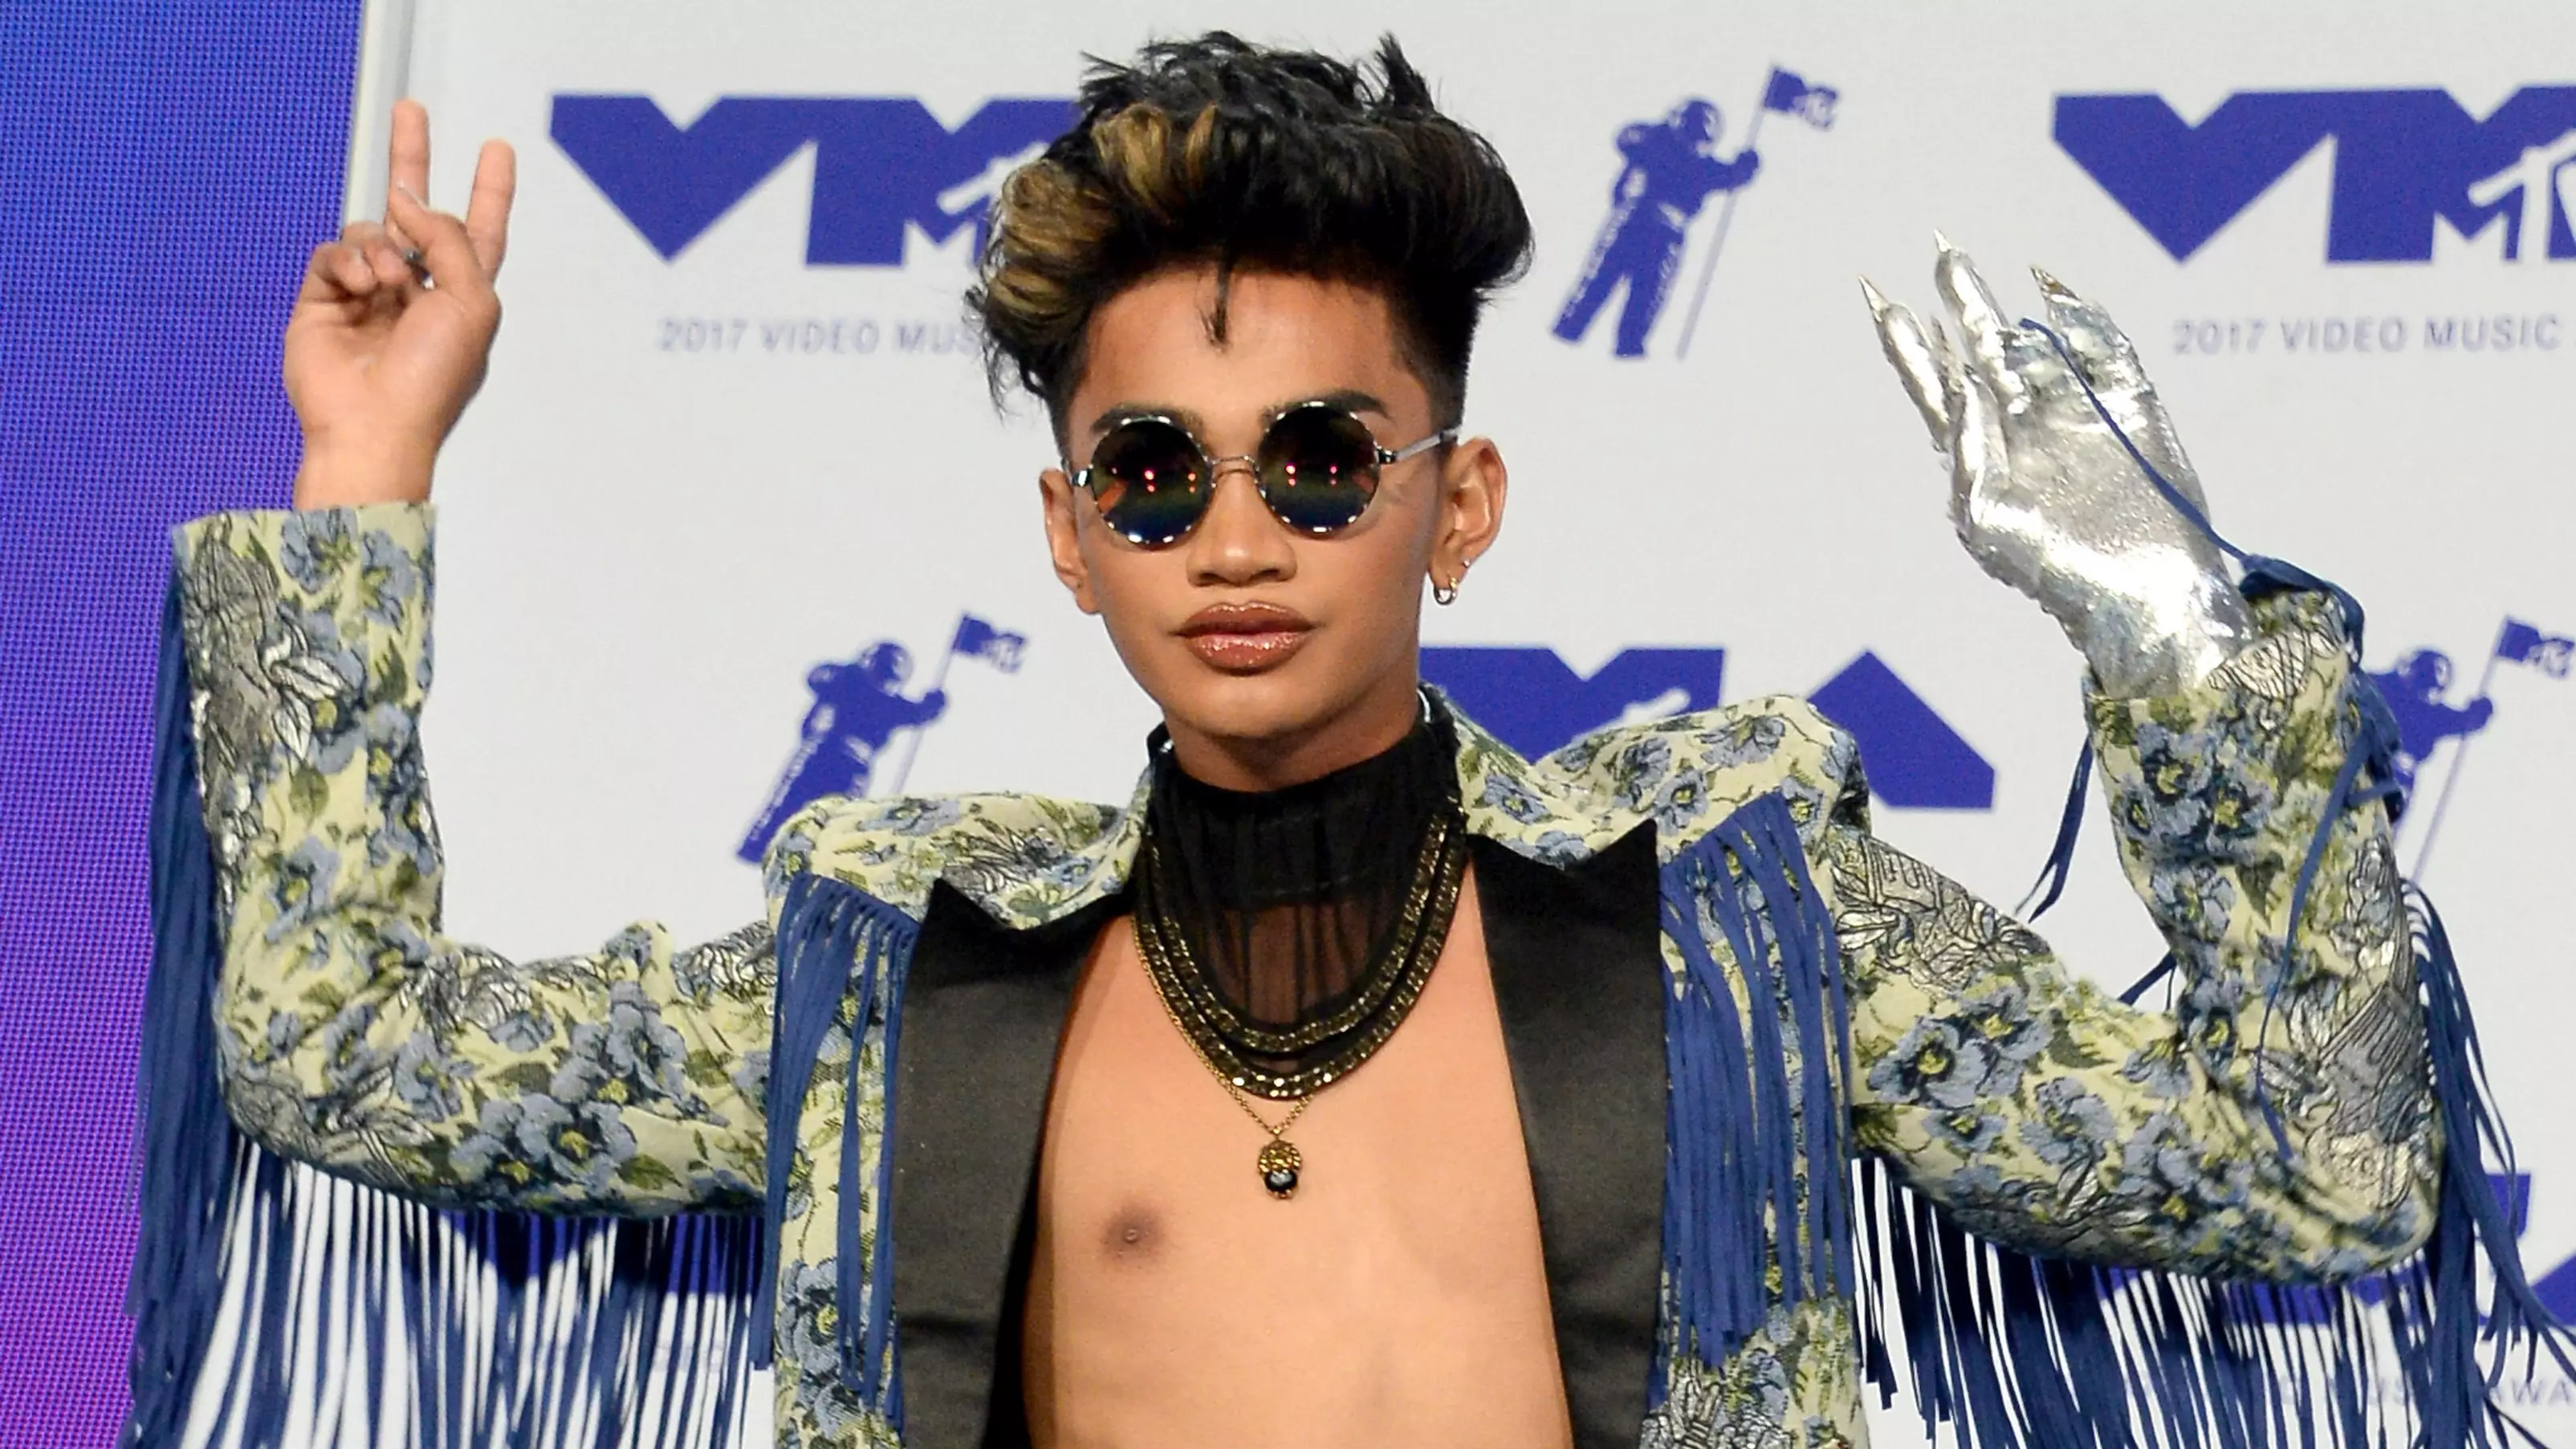 Influencer Bretman Rock Becomes Playboy’s First Ever Gay Male Cover Model 